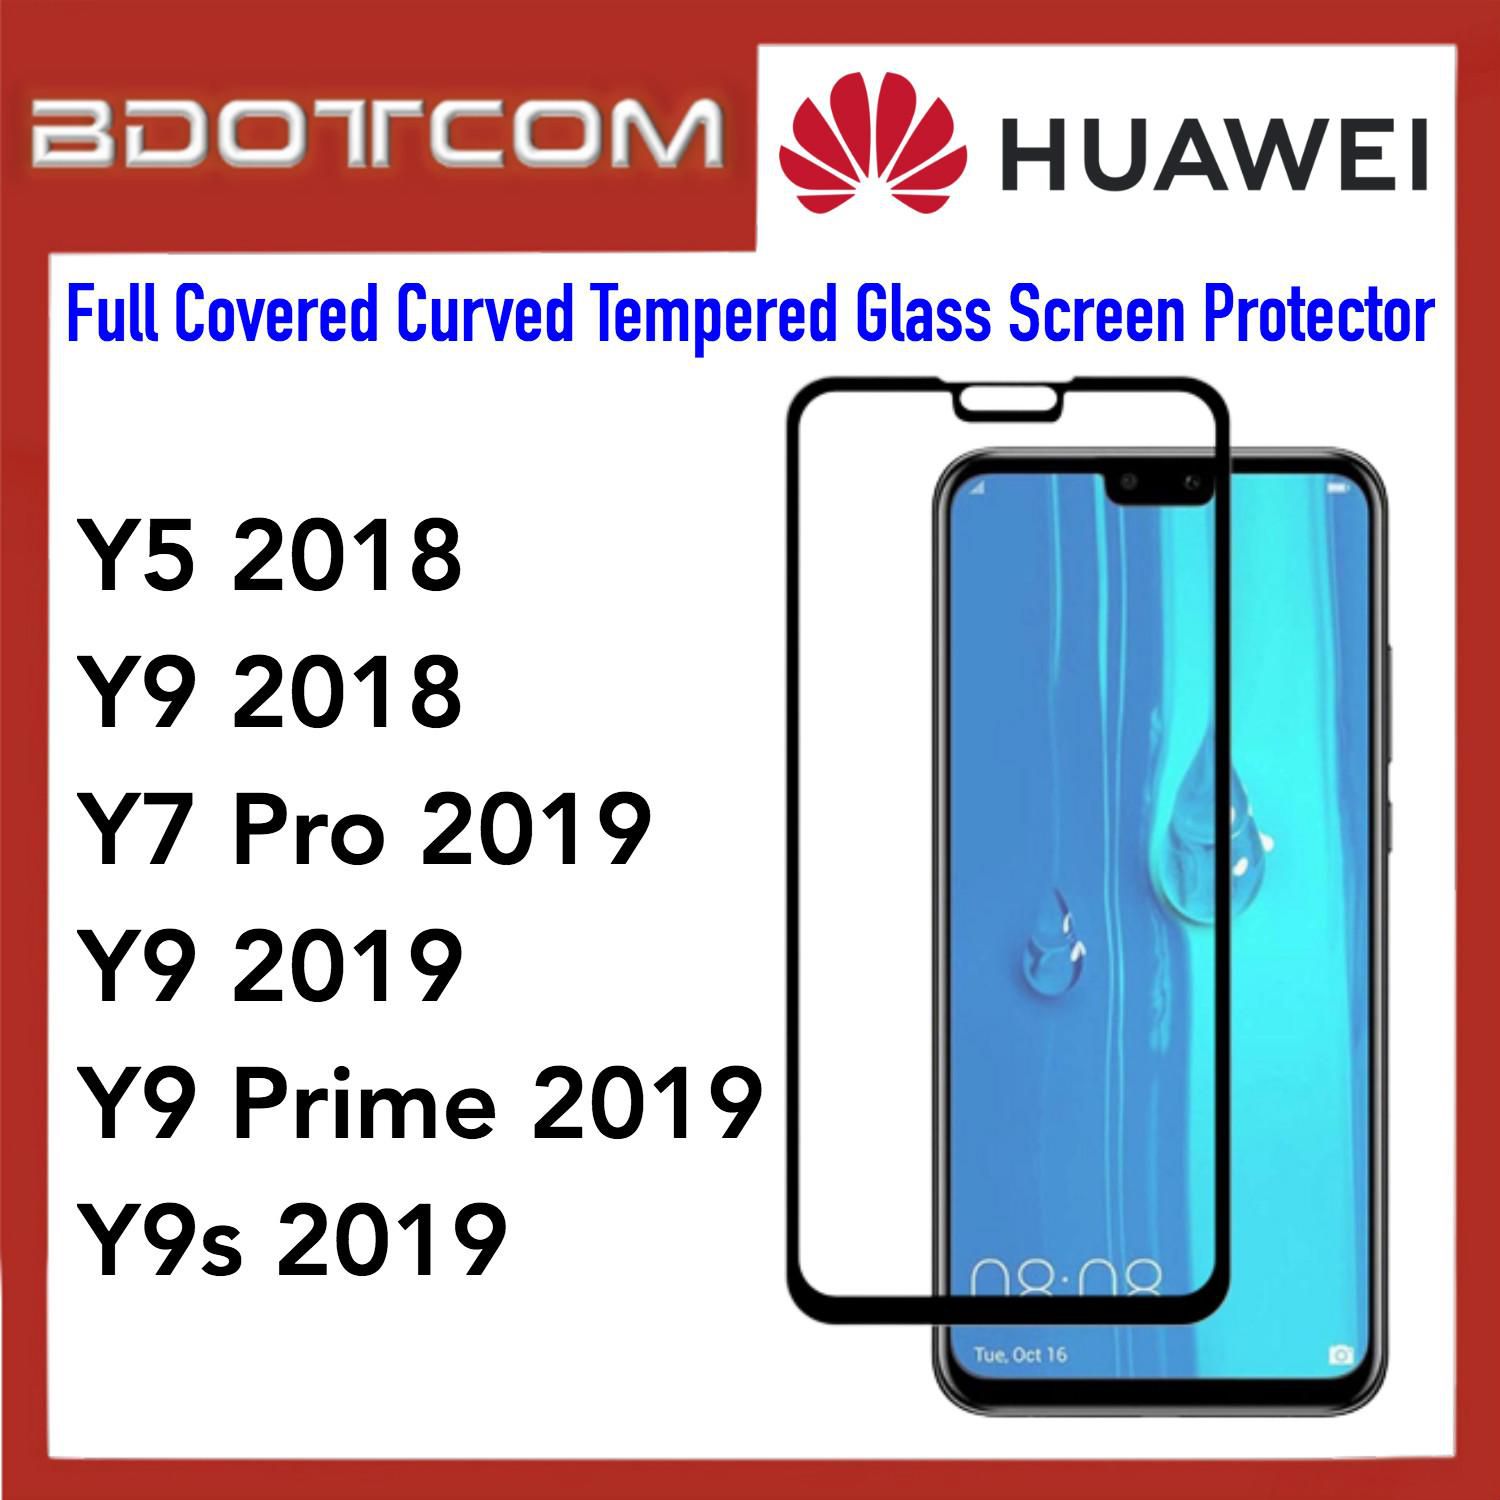 Bdotcom Full Covered Curved Glass Screen Protector for Huawei Y5 2018 (Black)